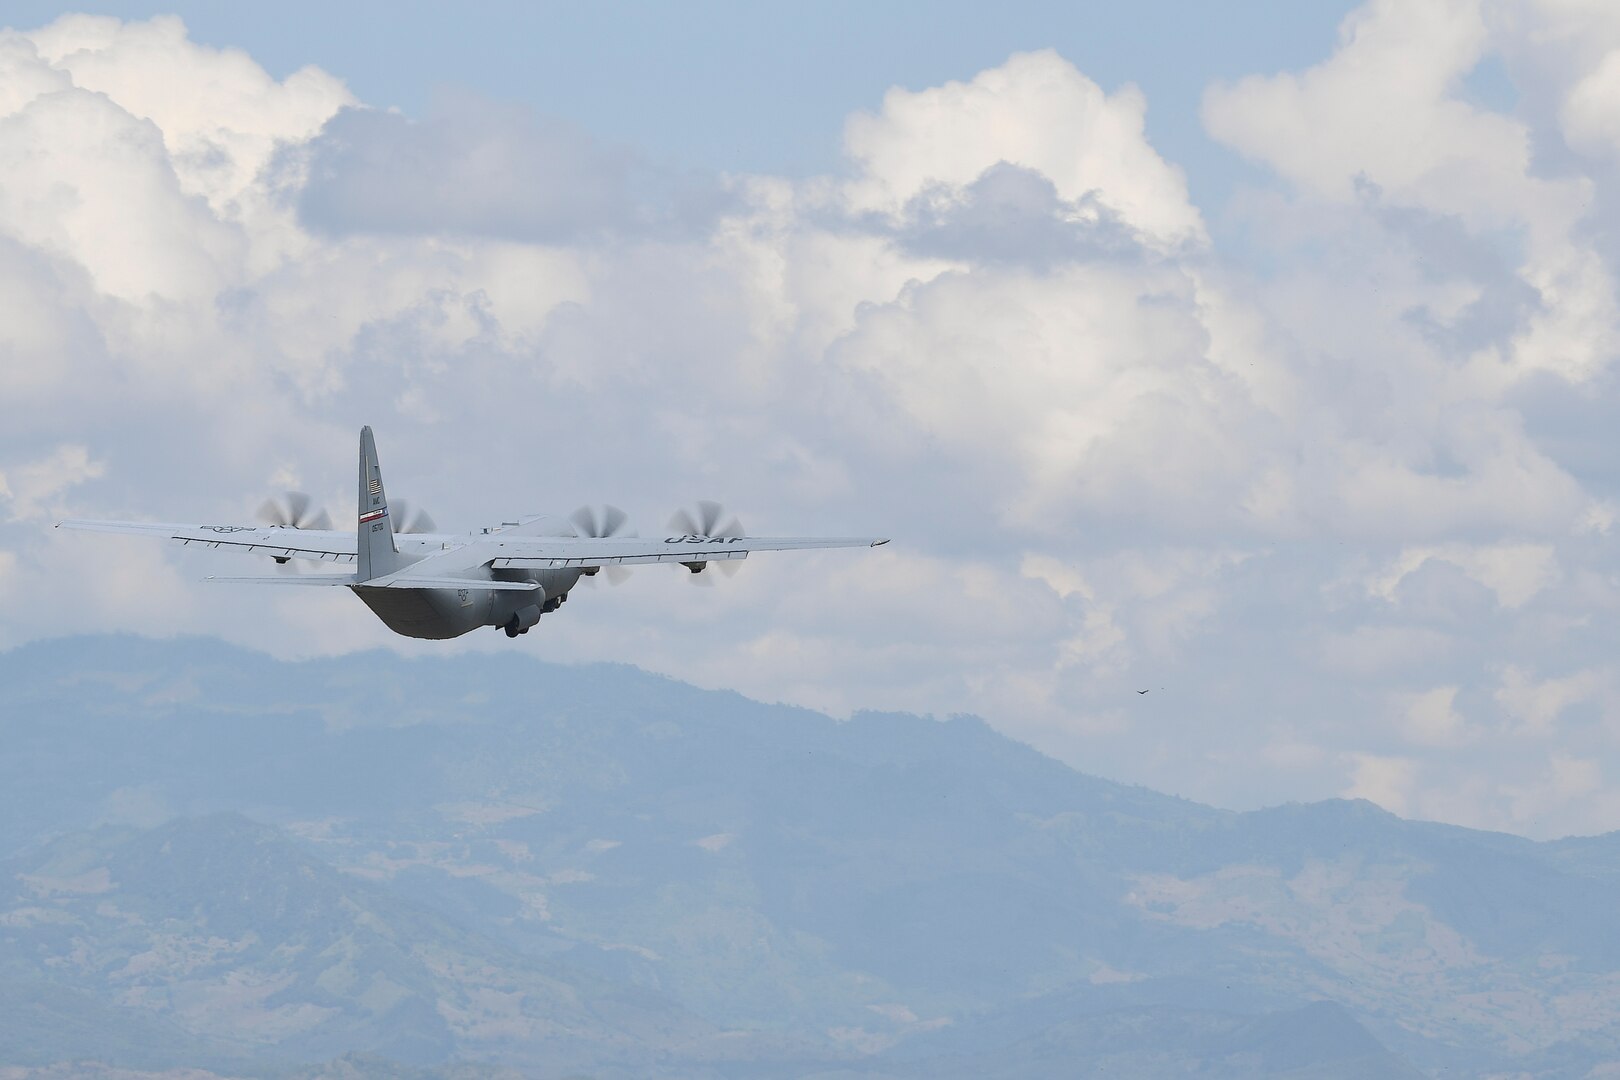 A C-130 Hercules from Dyess Air Force Base, Texas, takes flight from Soto Cano Air Base, Honduras, headed towards Haiti to support the ongoing Hurricane Matthew disaster relief efforts Oct. 7, 2016. At the request of U.S. Southern Command, U.S. Transportation Command directed C-17 Globemaster III and C-130 cargo aircraft to Soto Cano AB to move critical supplies and personnel to Haiti where approximately 200 Soldiers, Airmen and Marines from Special Purpose Marine Air-Ground Task Force-Southern Command and Joint Task Force-Bravo deployed this week with two CH-53E Super Stallion, three CH-47 Chinook, and two UH-60L and two HH-60L Black Hawk helicopters to provide heavy and medium lift to support the U.S. Agency for International Development-led mission.